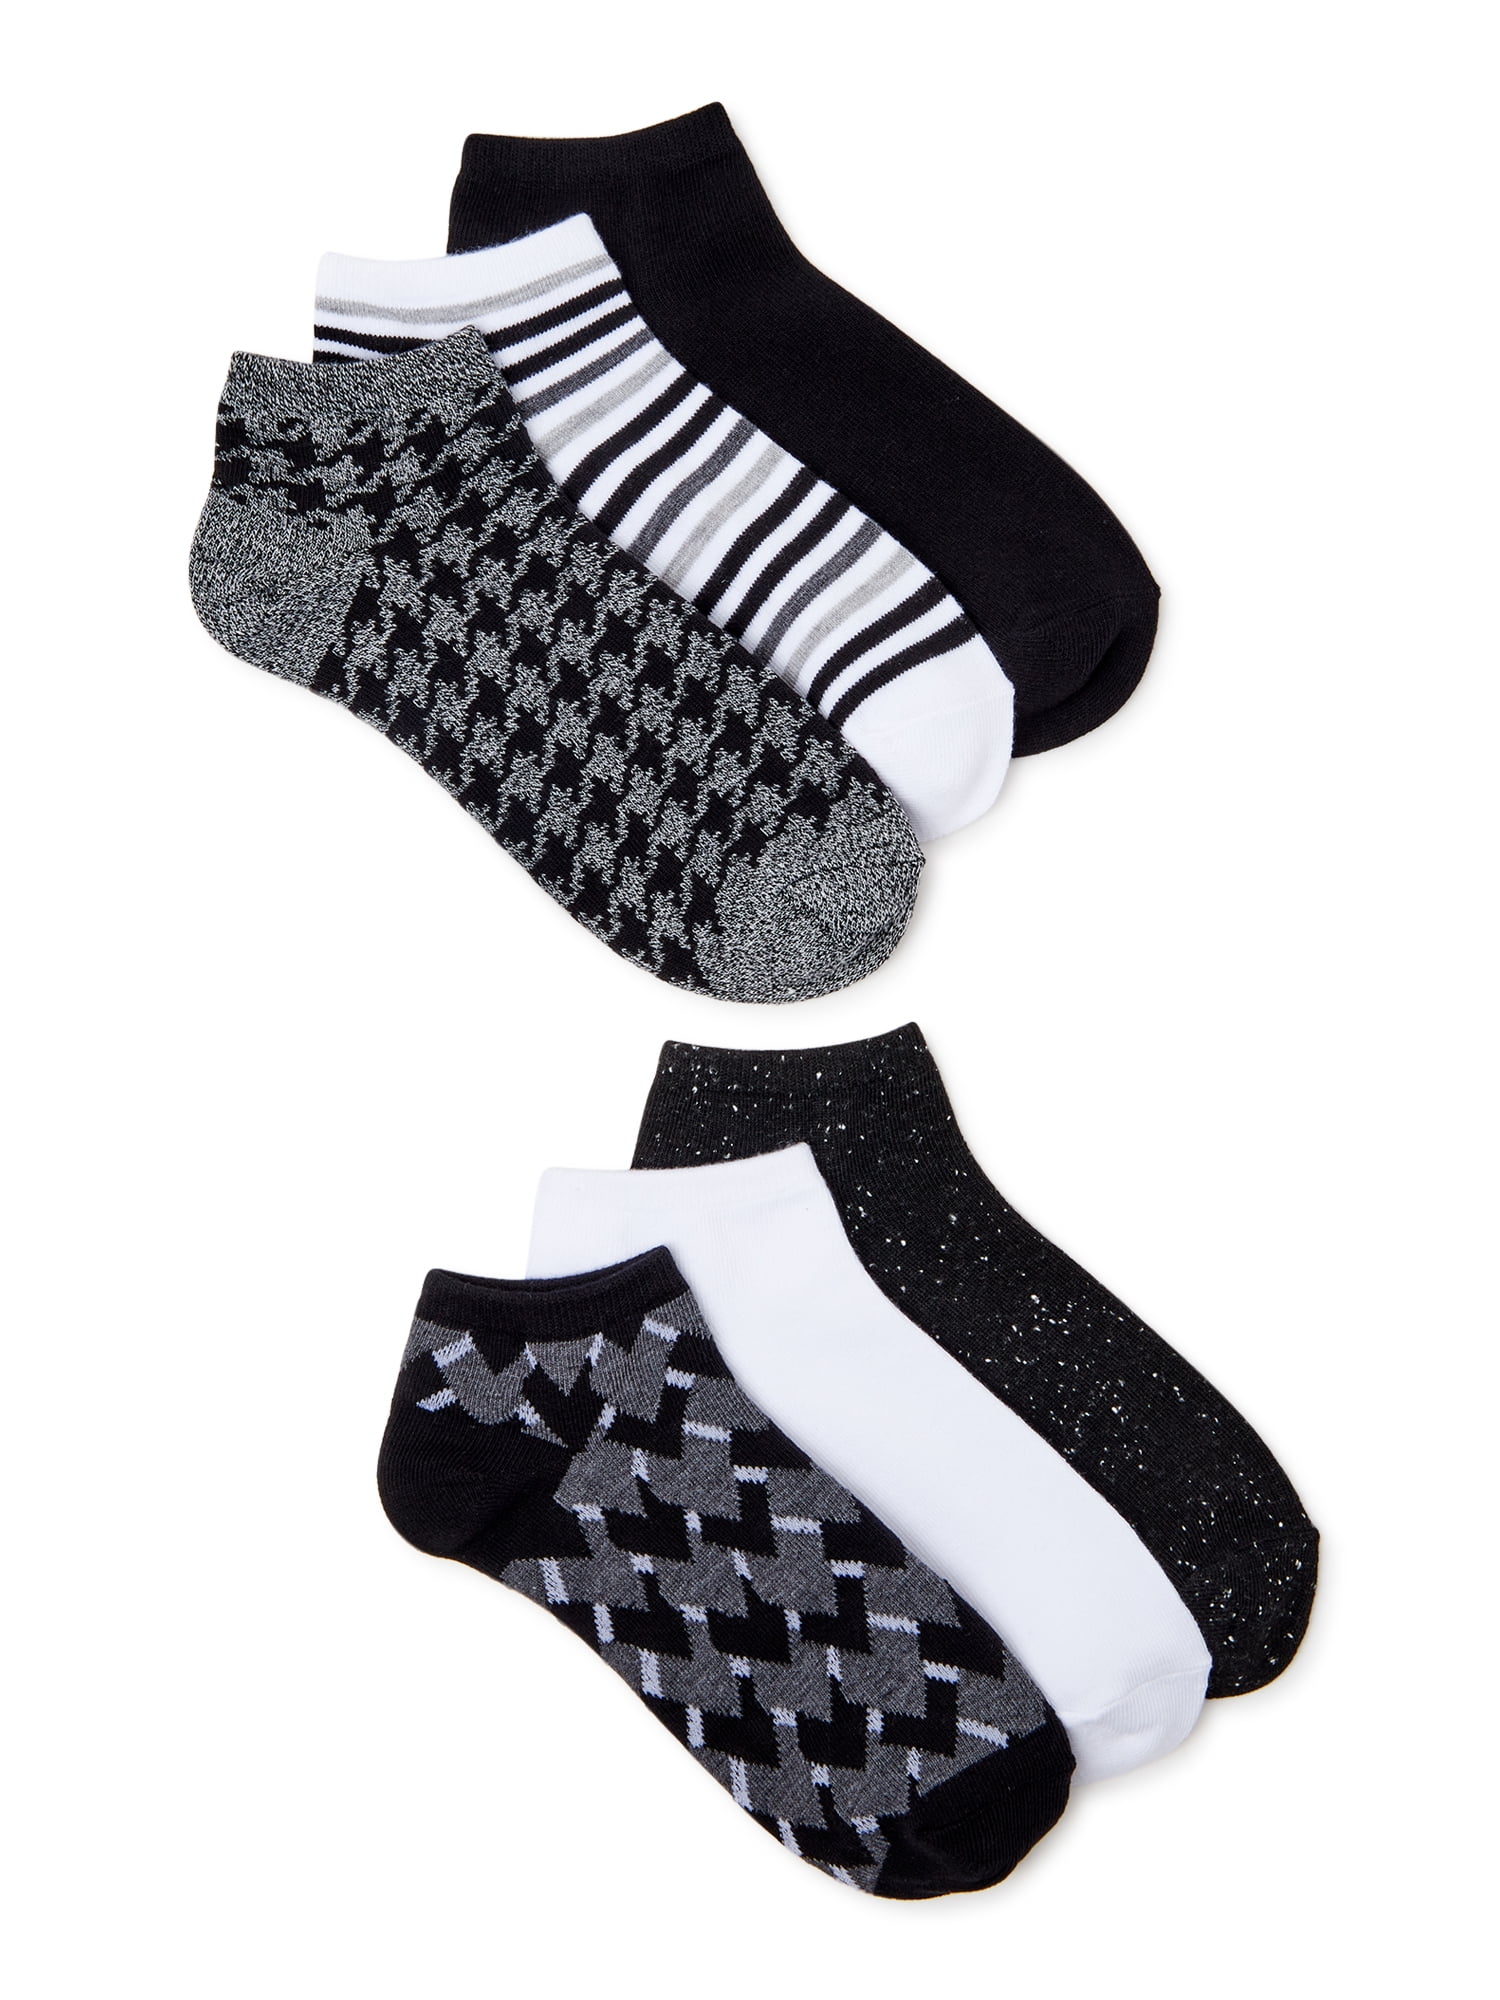 ASSORTED 3D UNISEX ADULT PRINTED LOW CUT ANKLE SOCKS ONE SIZE FITS UP TO SIZE 6 